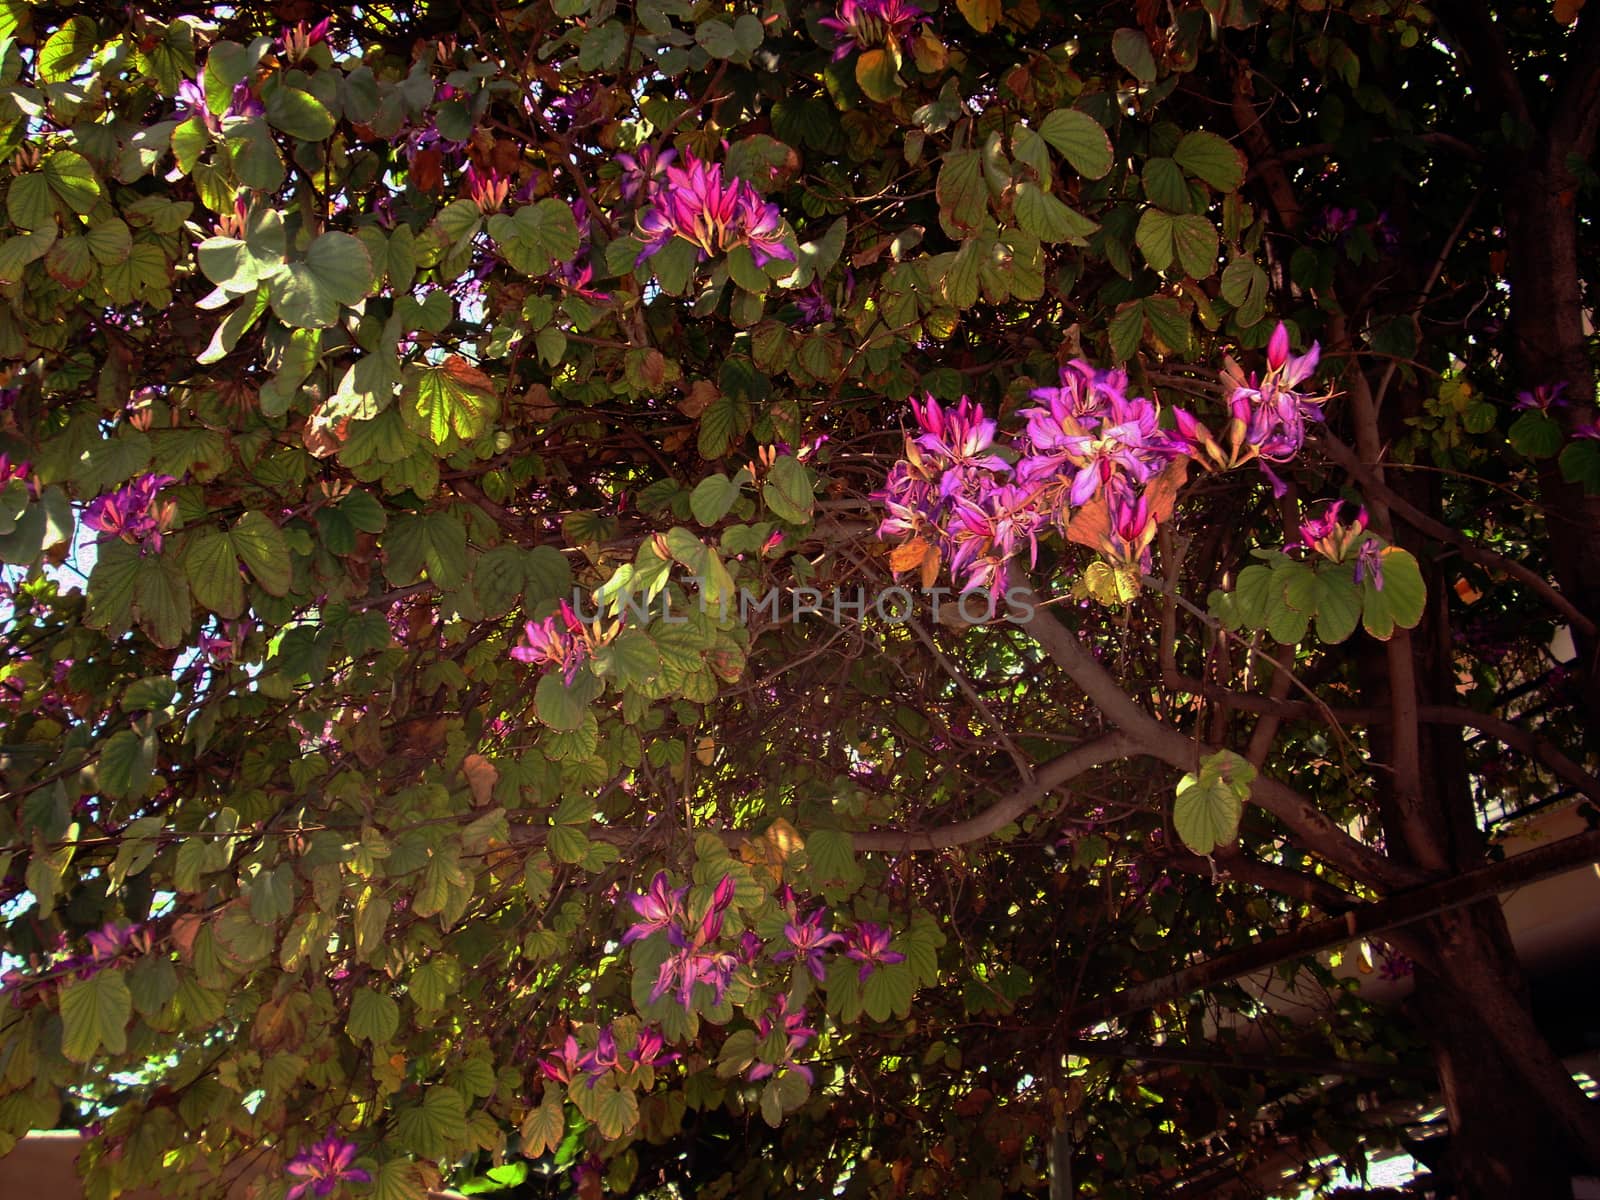 Bauhinia orchid tree with lilac flowers by Irarlaki